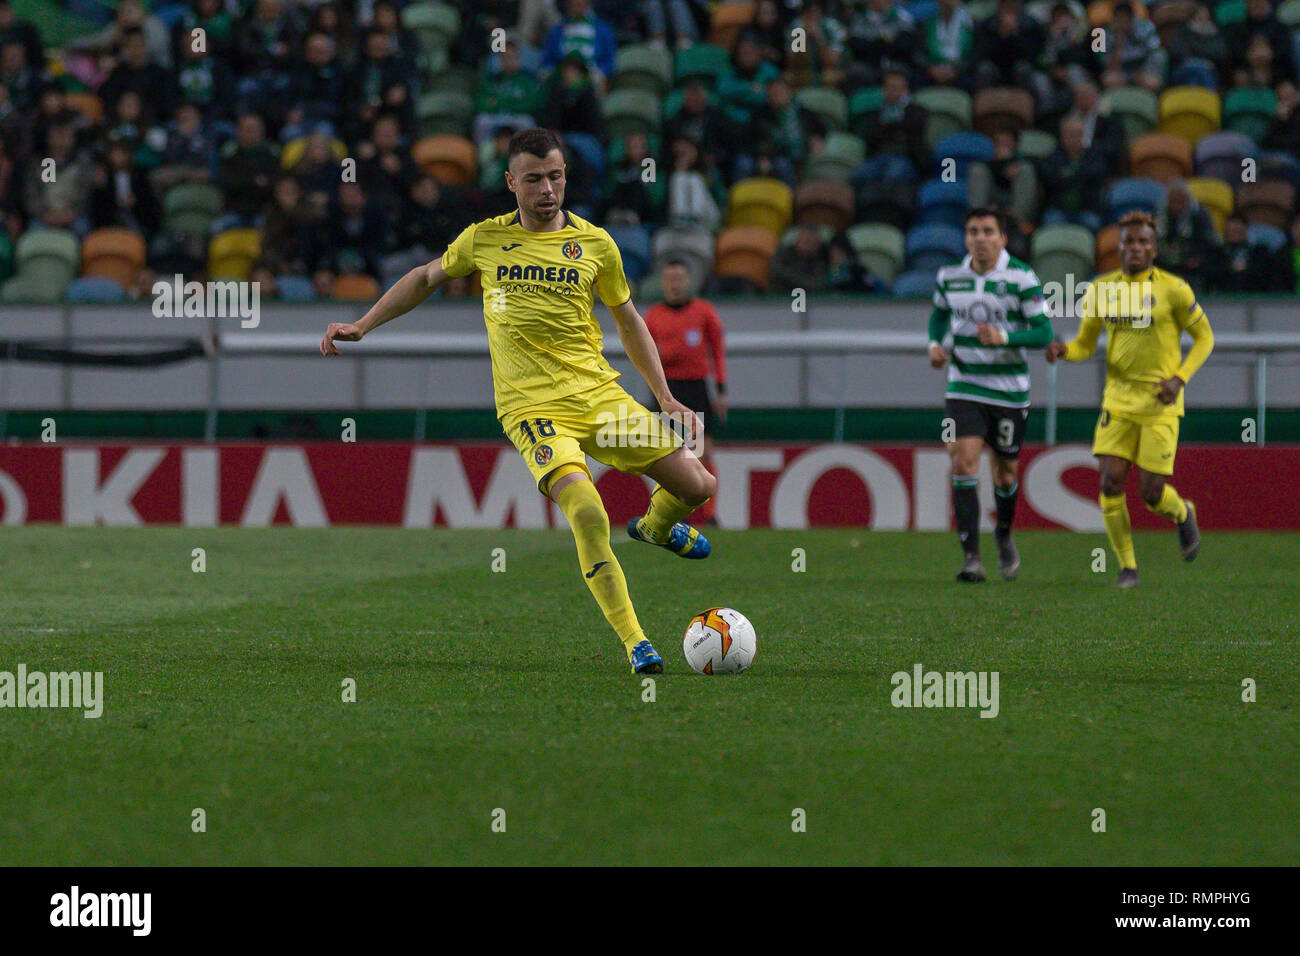 Lisbon, Portugal. 14th Feb, 2019. February 14, 2019. Lisbon, Portugal. Villarreal's midfielder from Spain Javi Fuego (18) in action during the game of the UEFA Europa League, Round of 32, Sporting CP vs Villarreal CF © Alexandre de Sousa/Alamy Live News Credit: Alexandre Sousa/Alamy Live News Stock Photo